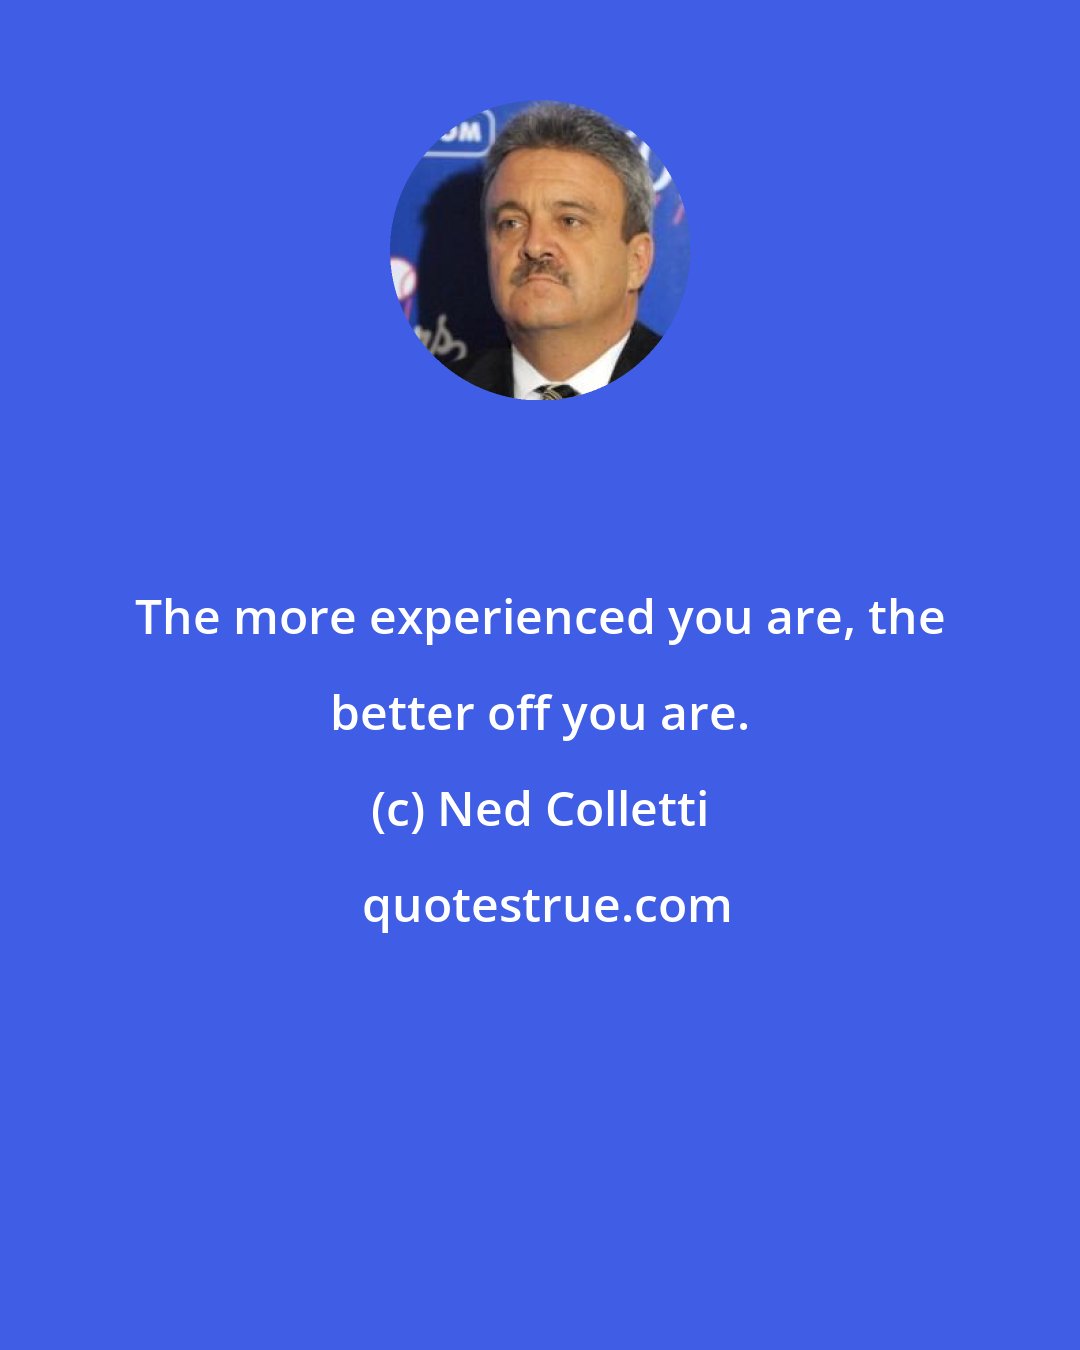 Ned Colletti: The more experienced you are, the better off you are.